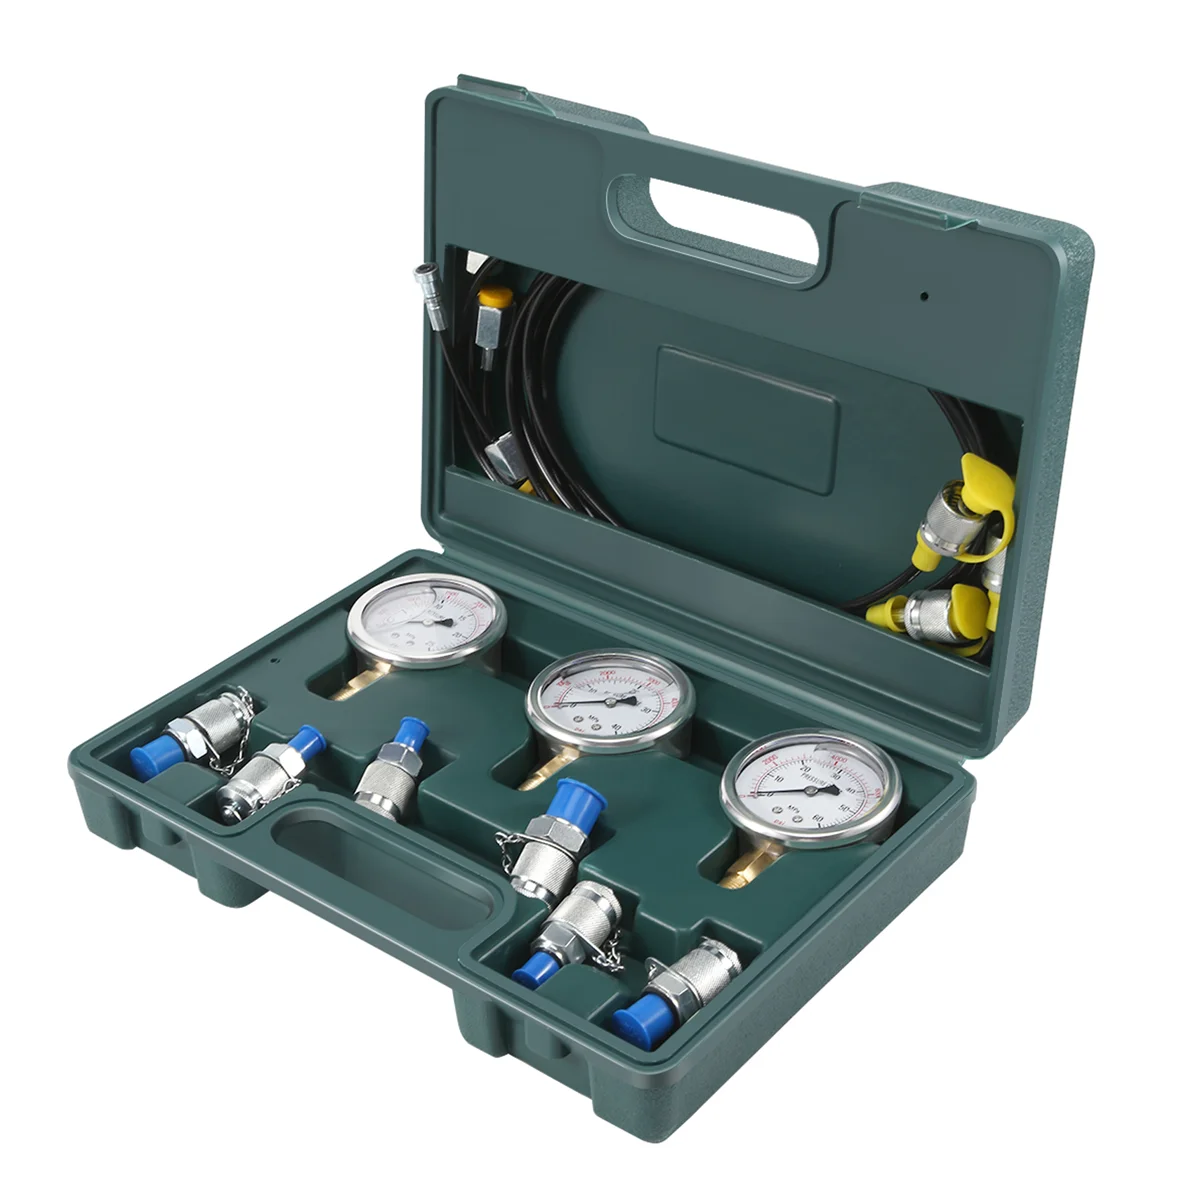 

Hydraulic Pressure Guage Excavator Hydraulic Pressure Test Kit With Testing Hose Coupling And Gauge Tools